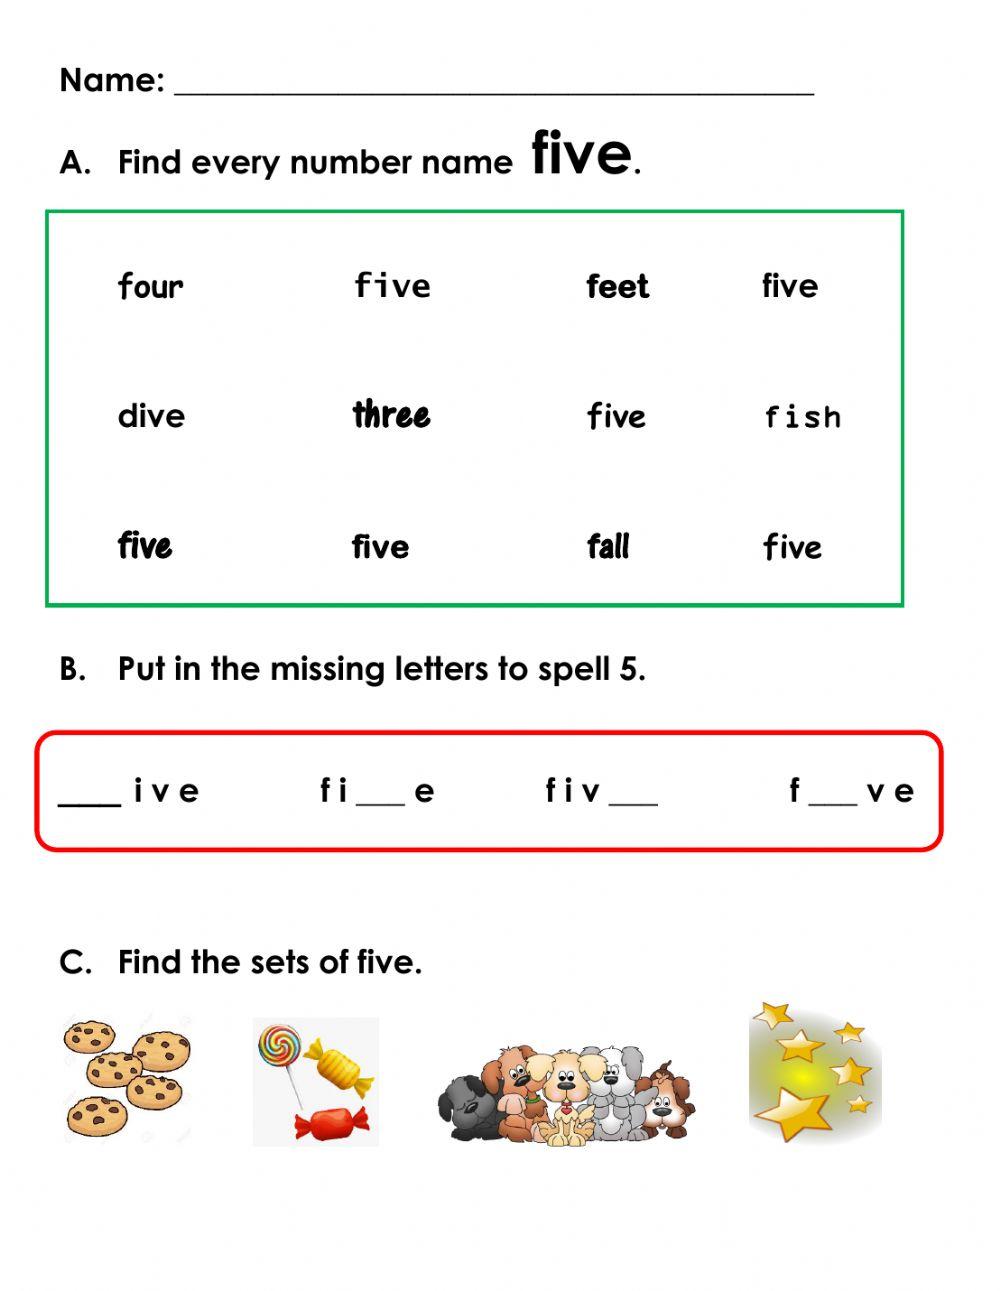 Number 5 - name and sets